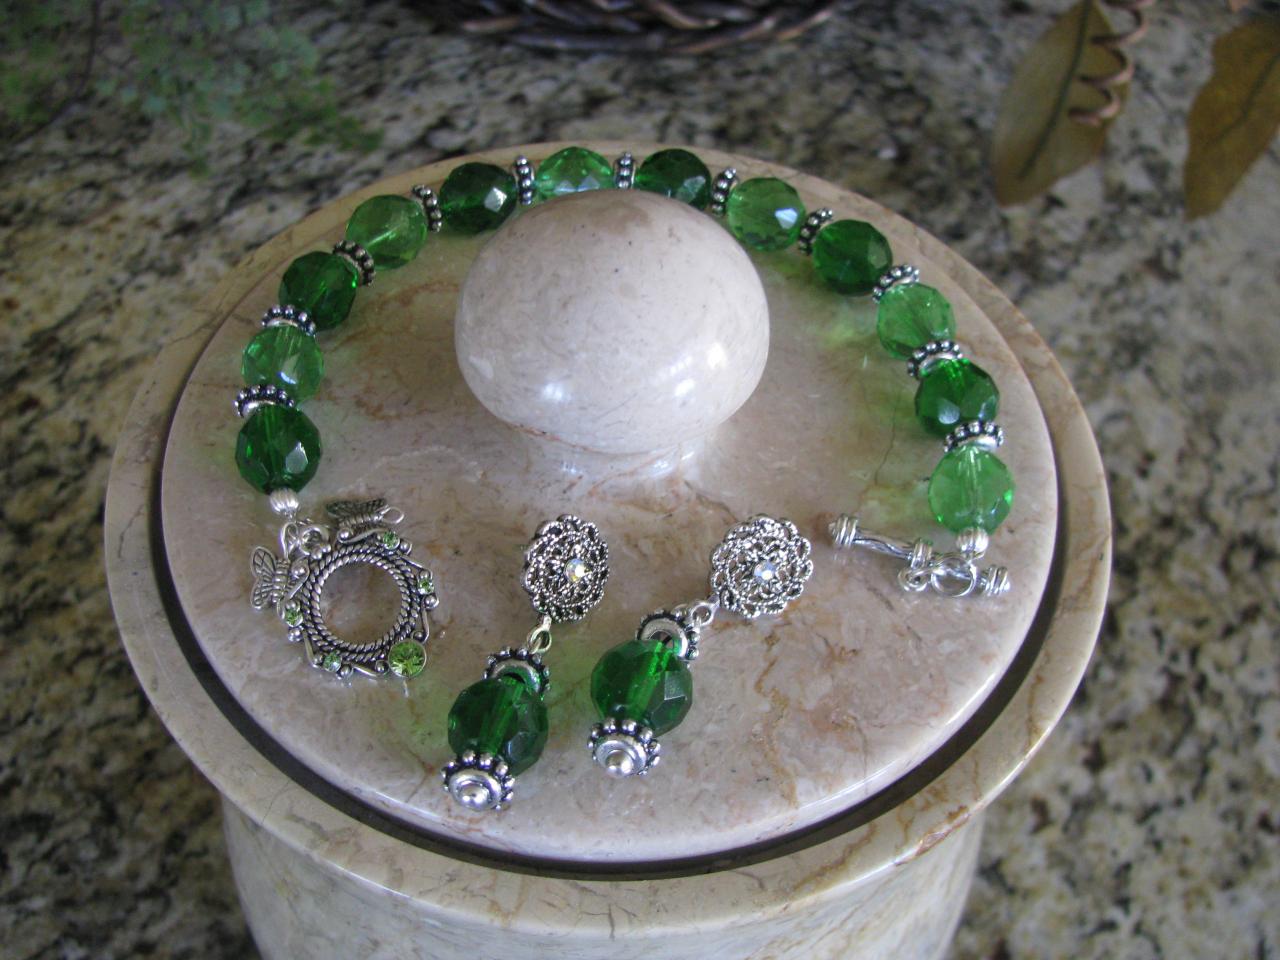 10 Off March Madness Celebrate Green St Patricks Day Bracelet With Swarovski Toggle Clasp And Matching Ornate Crystal Stud Earrings